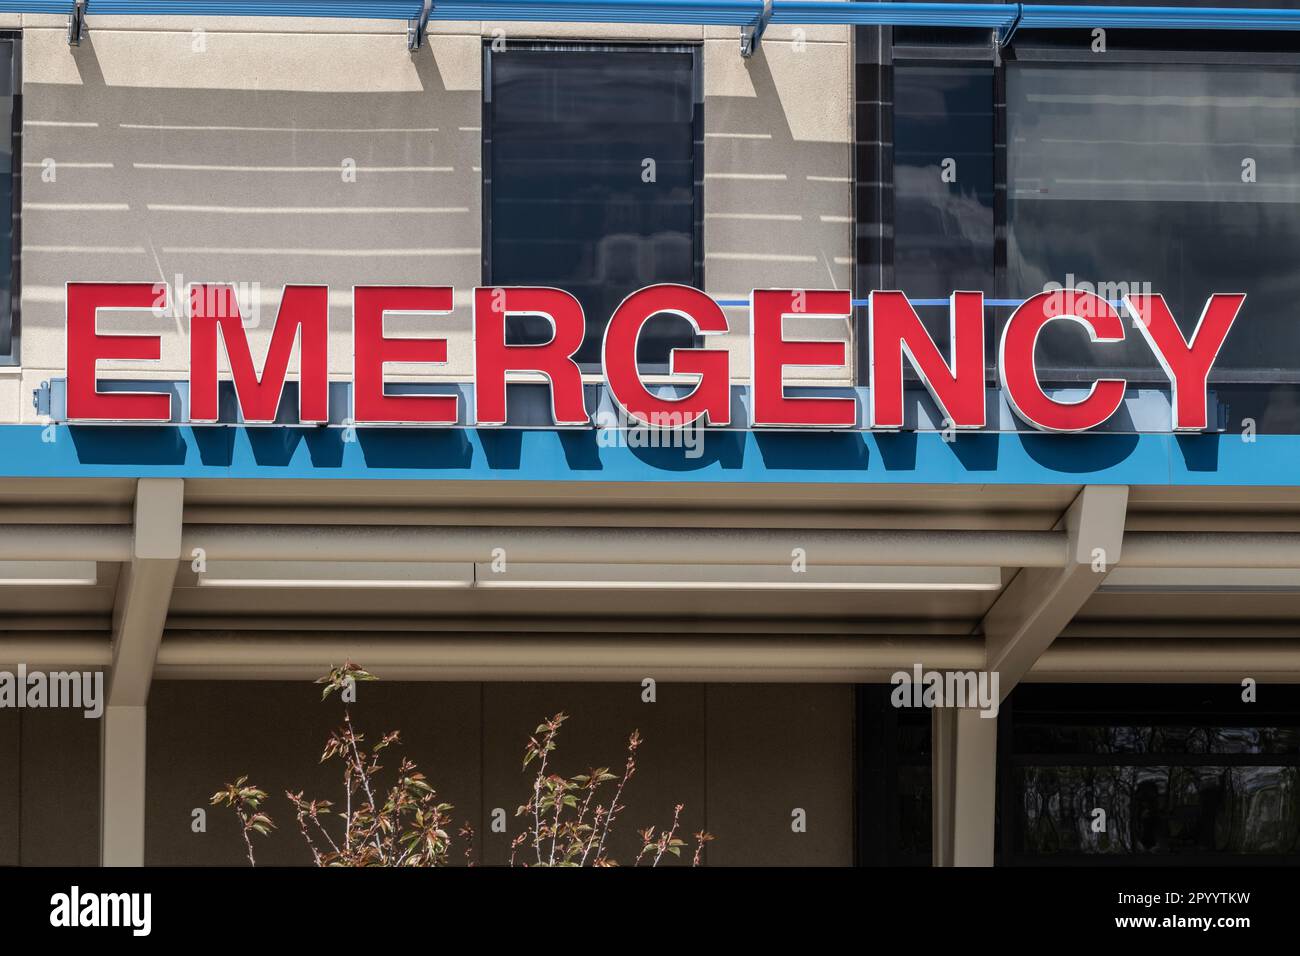 Emergency Room and Emergency Department entrance sign for a hospital in alert red. Stock Photo